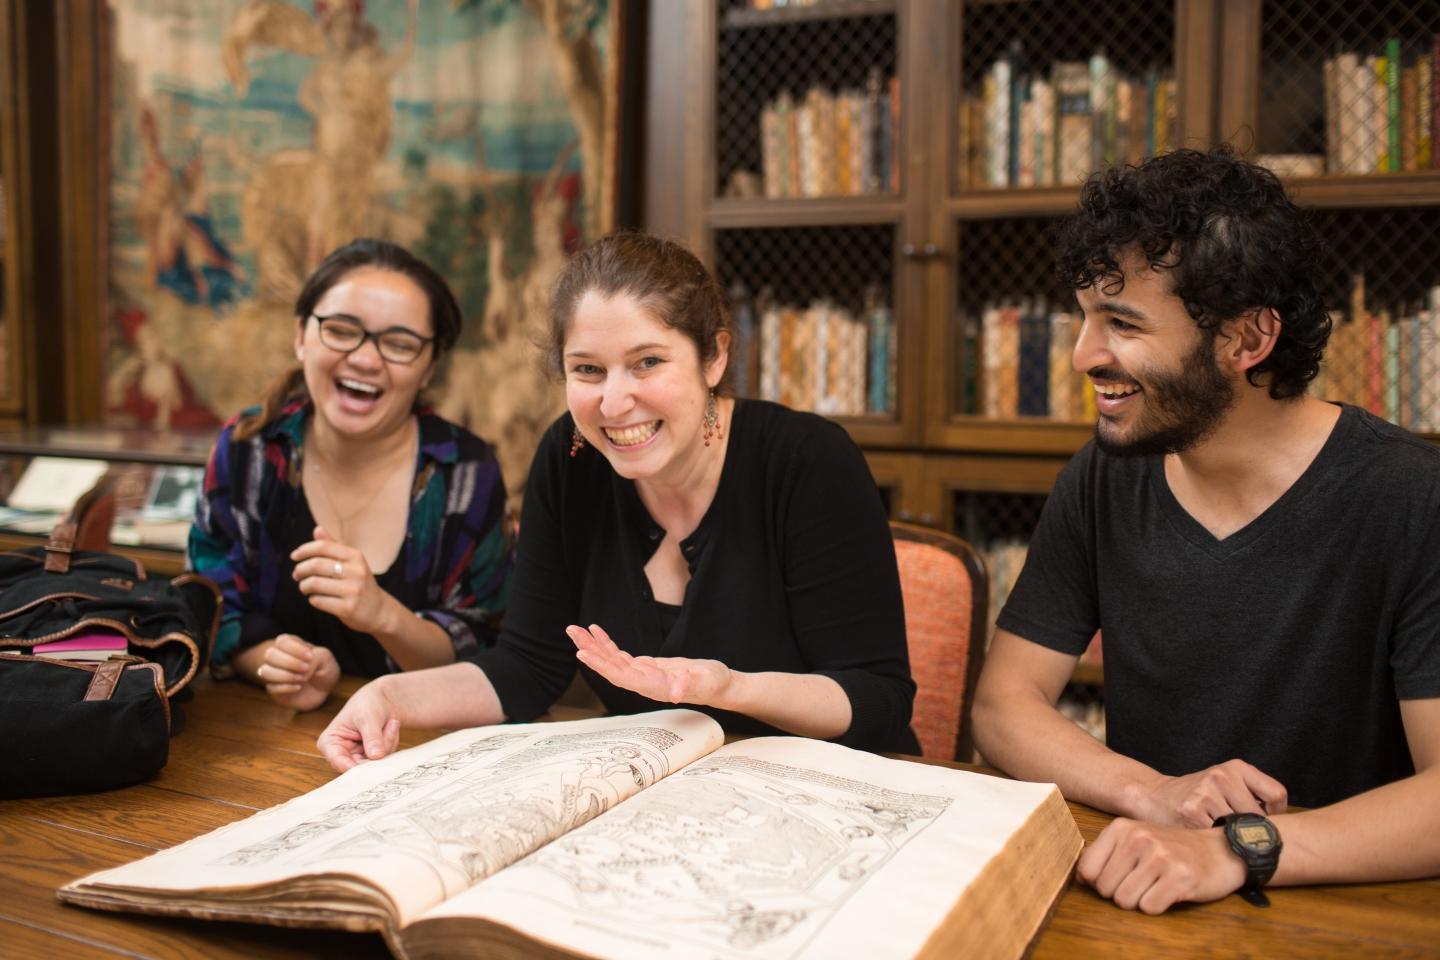 Students laugh as they examine a large, ancient book in Trinity's Special Collections.